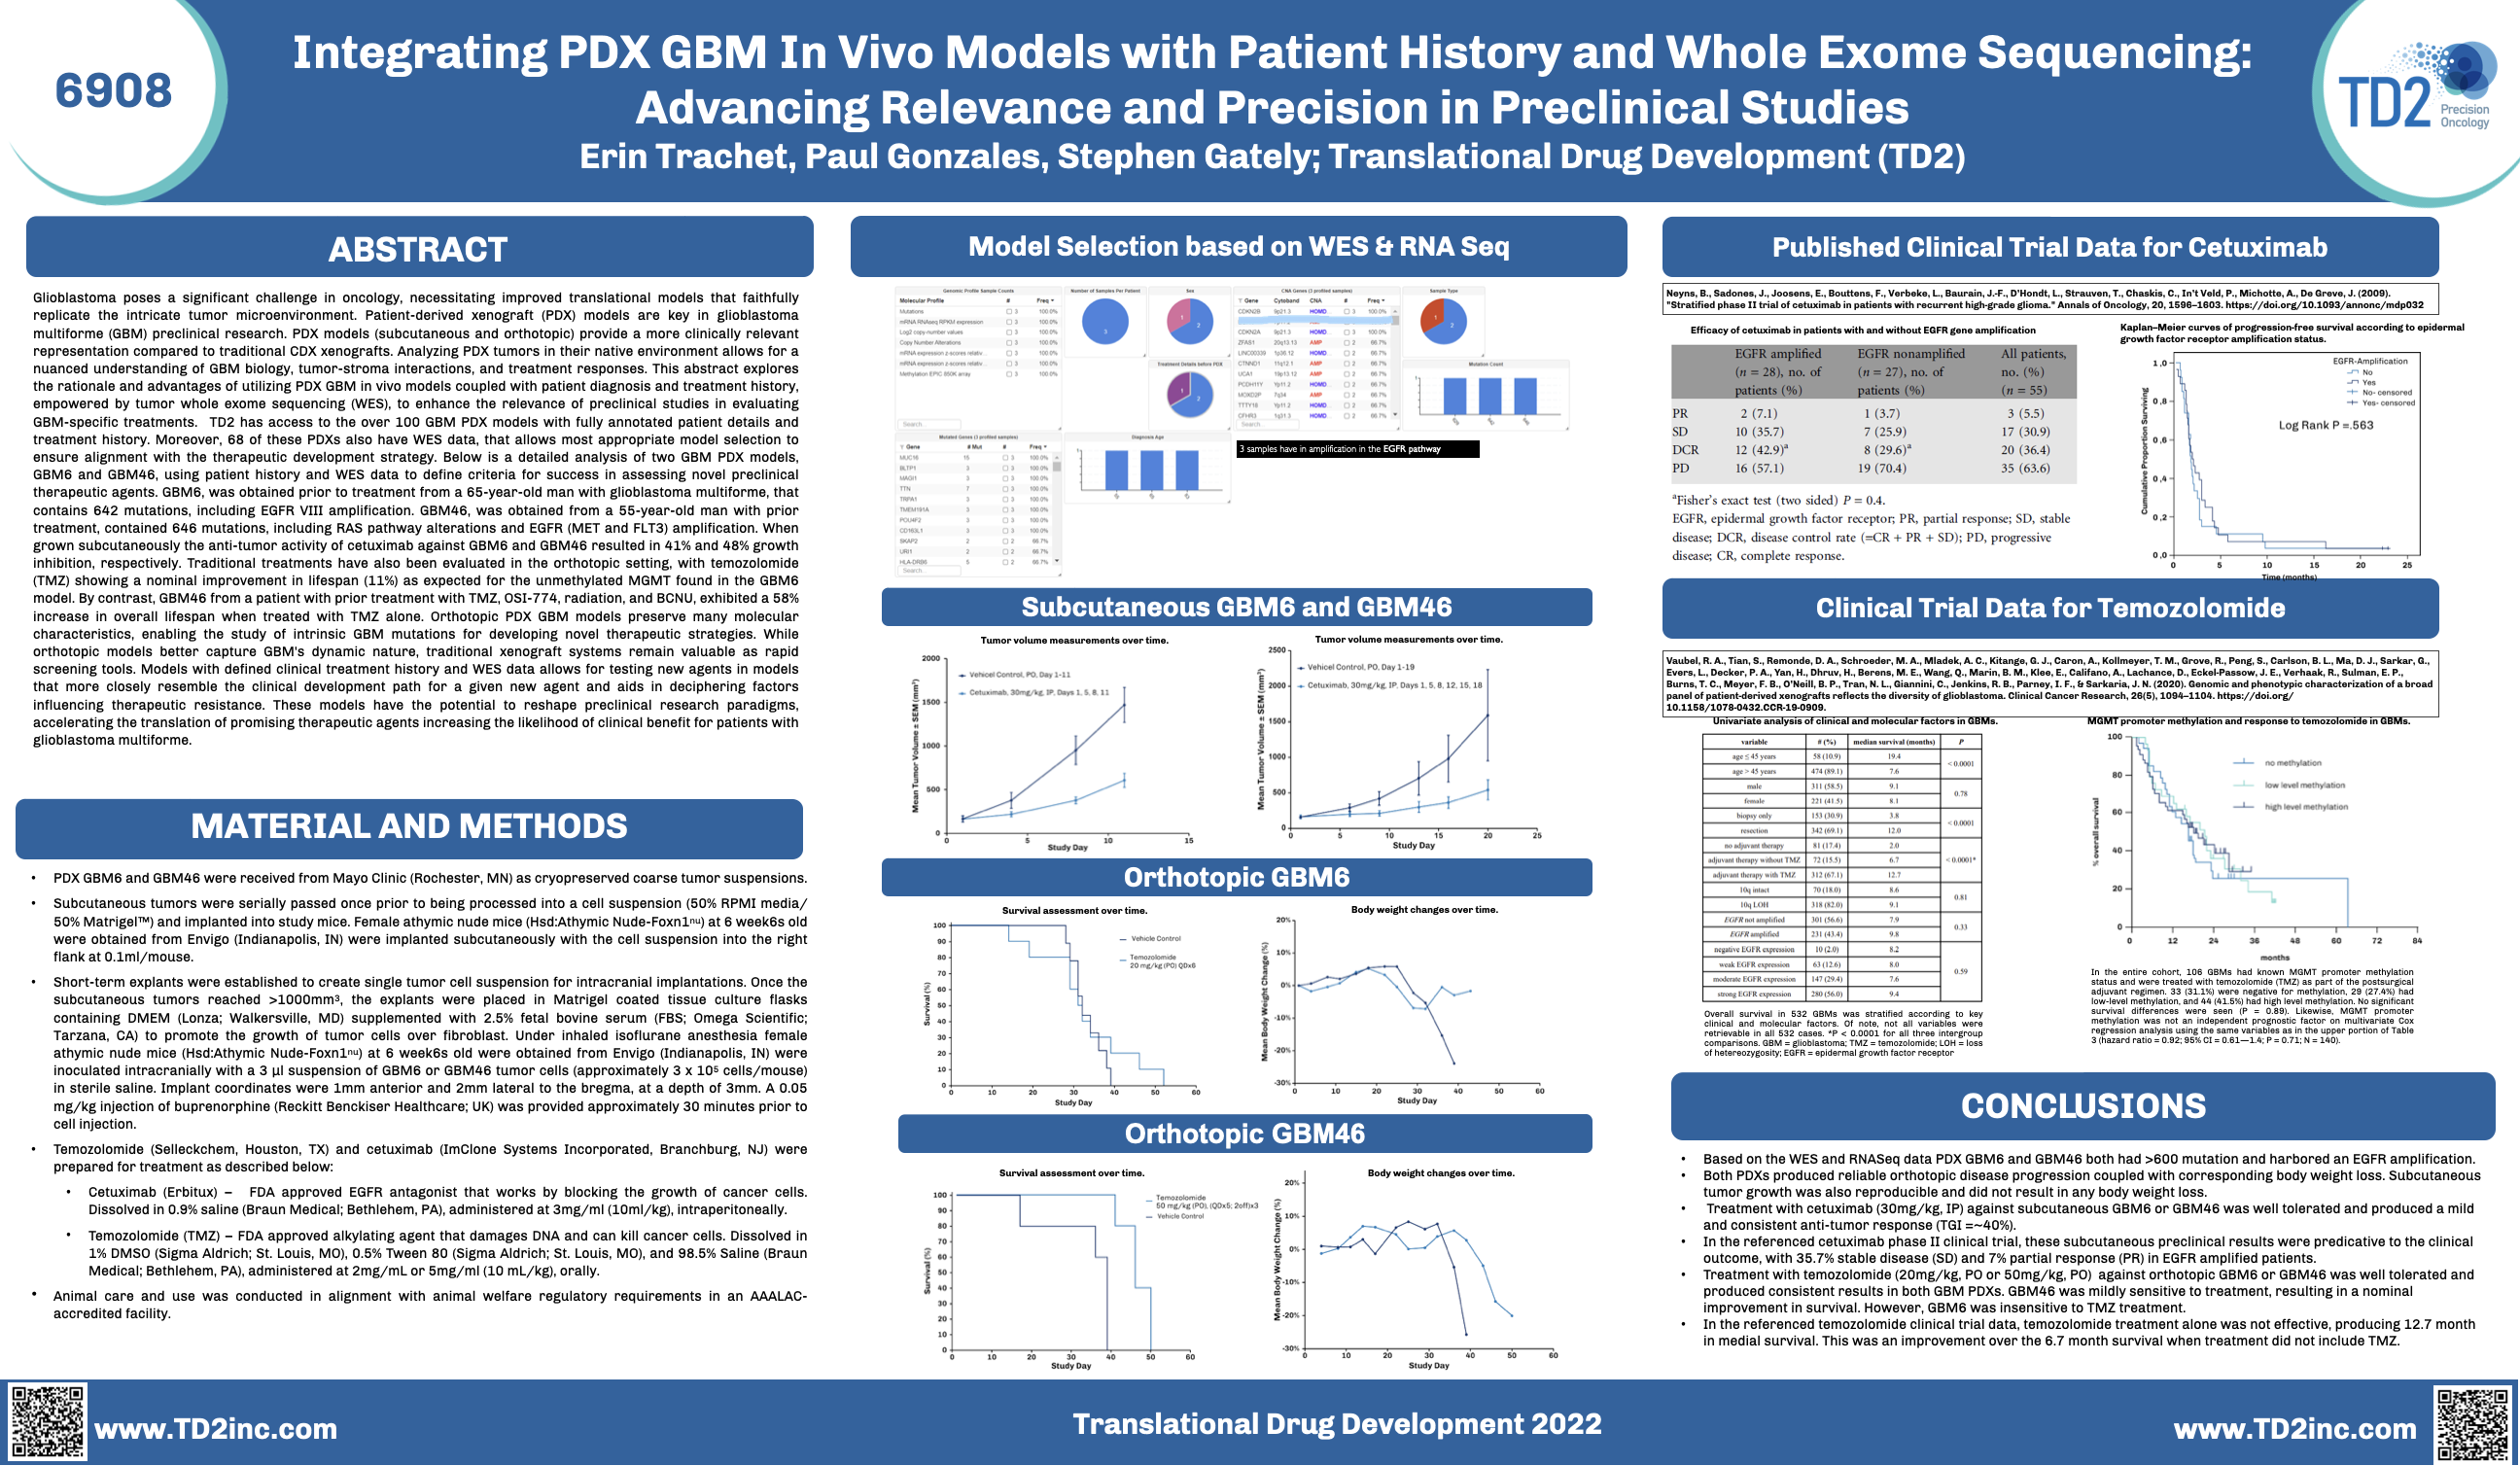 The Vital Role of Highly Characterized Glioblastoma PDX Models in Preclinical Cancer Research: Insights from TD2's Most Recent Studies